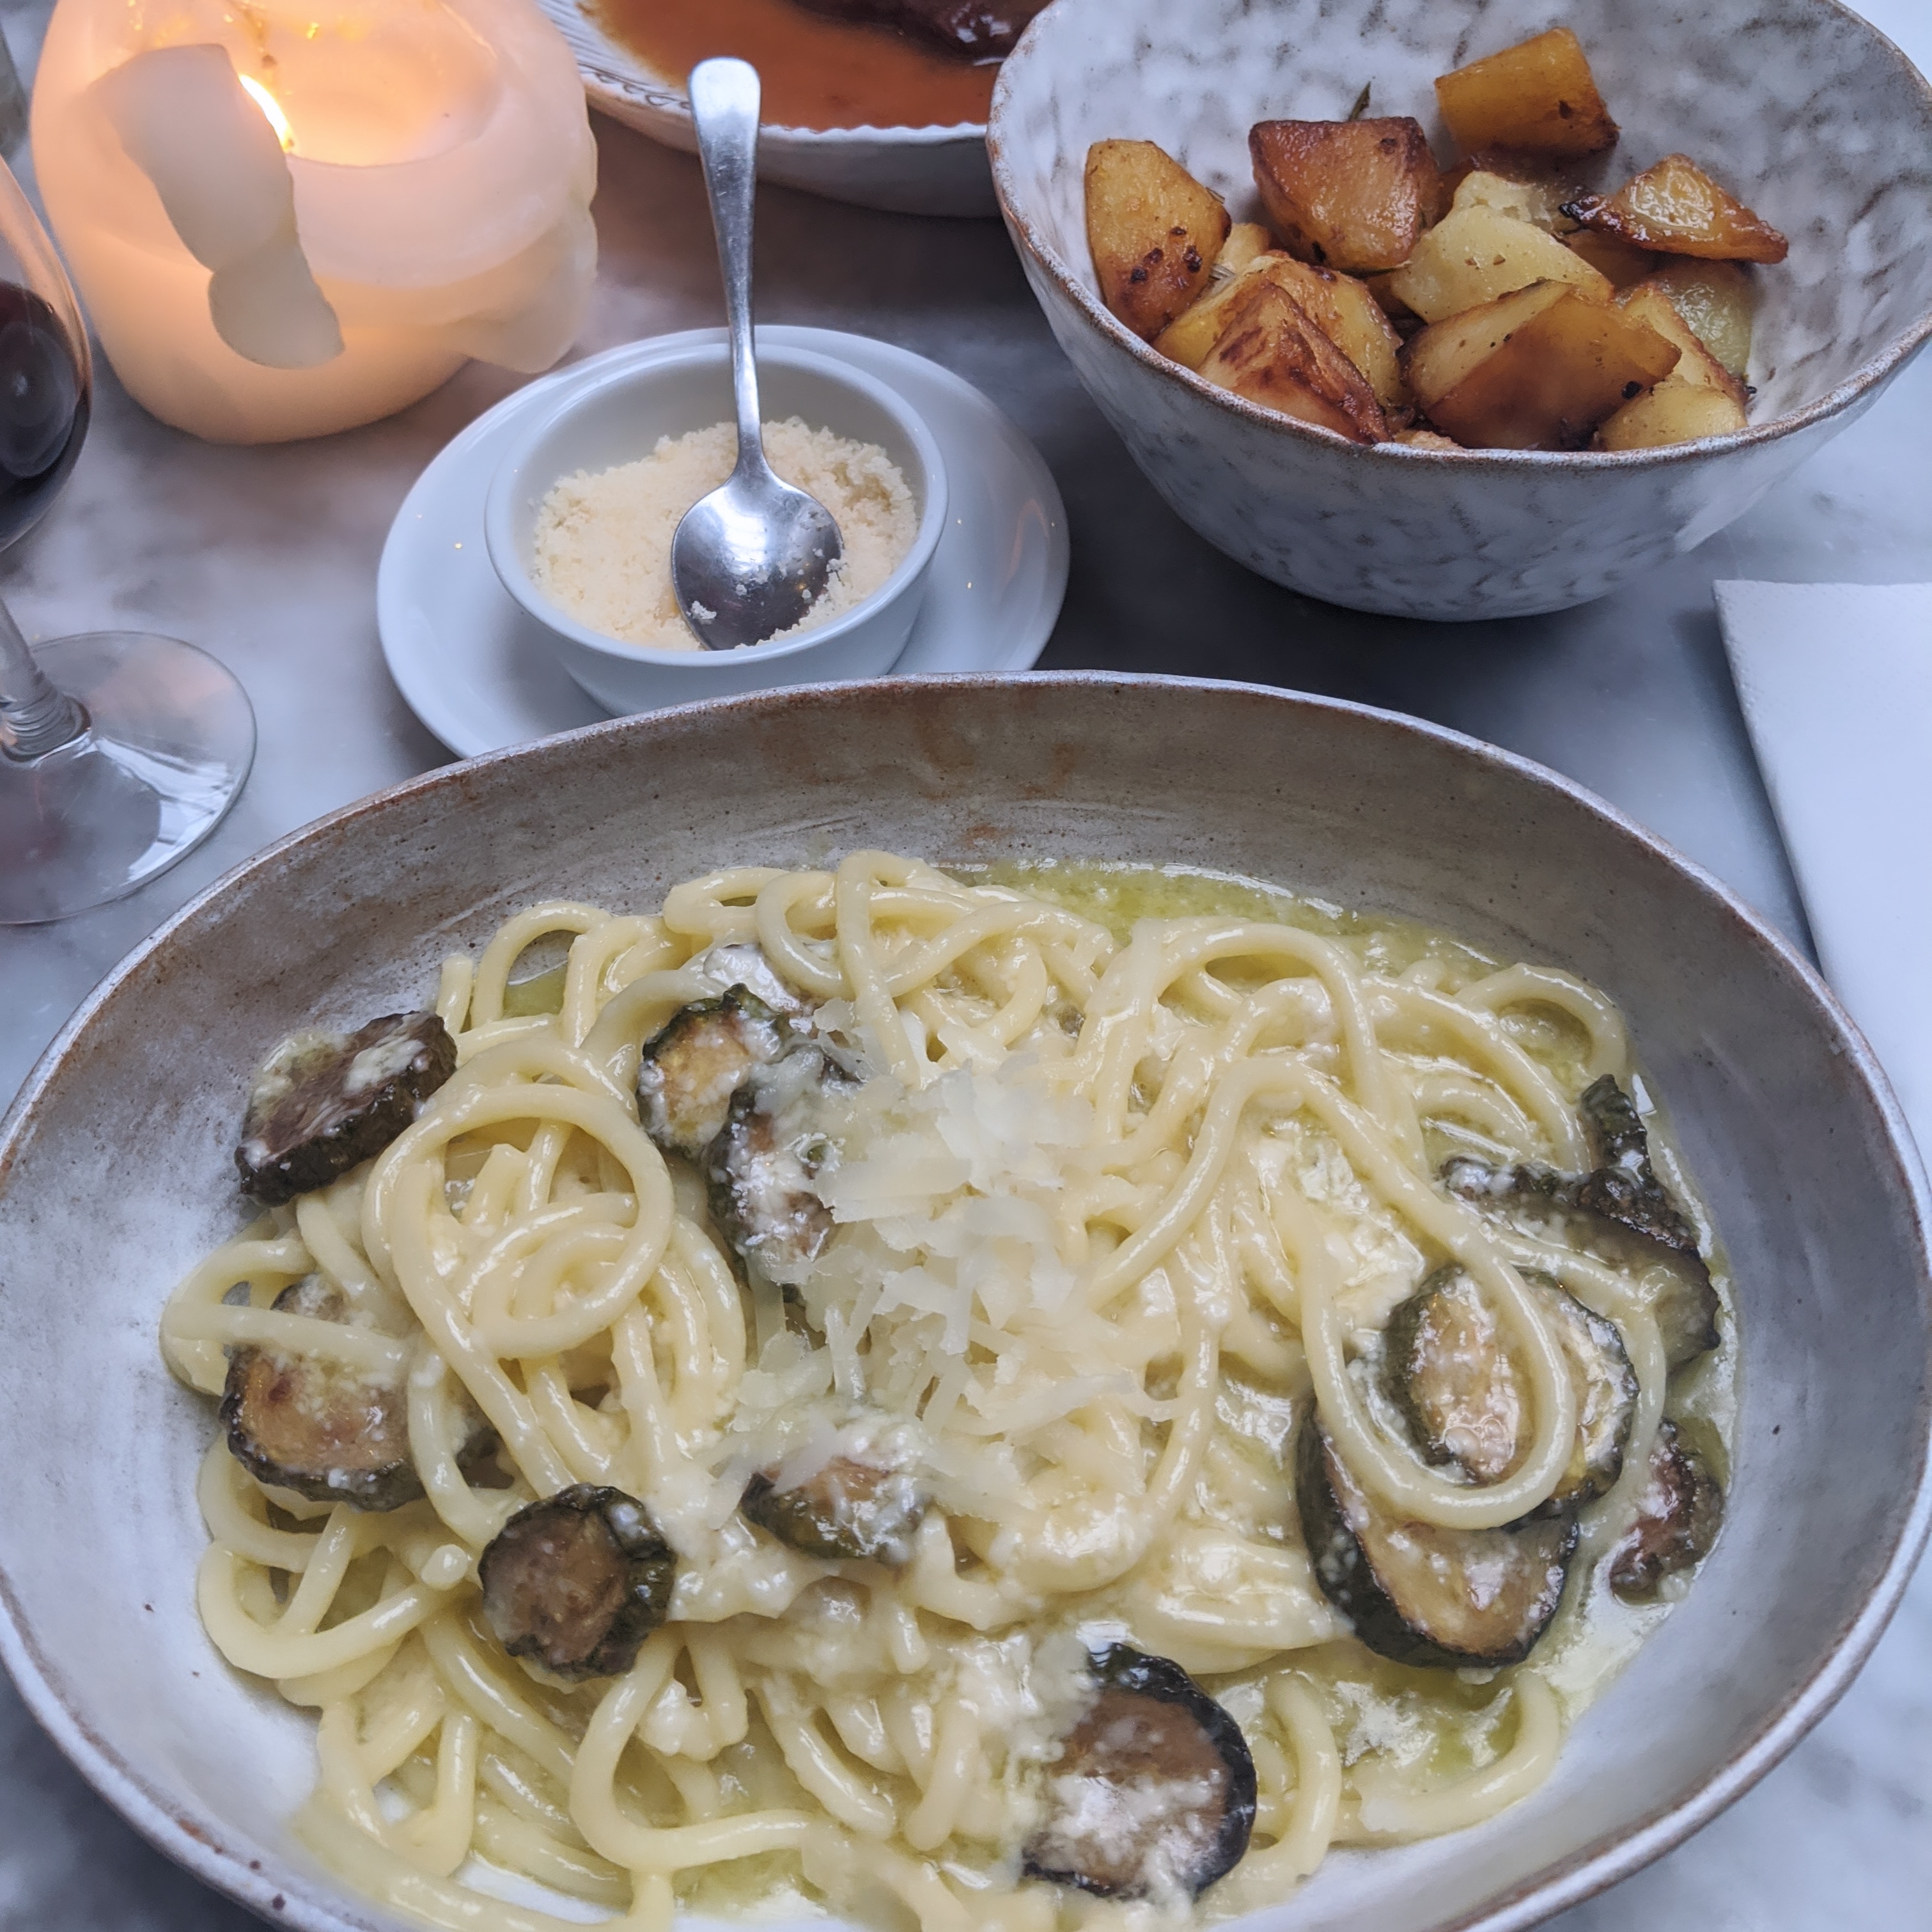 A plate of spaghetti with courgettes next to a bowl of fried potatoes at Campania near Columbia Road